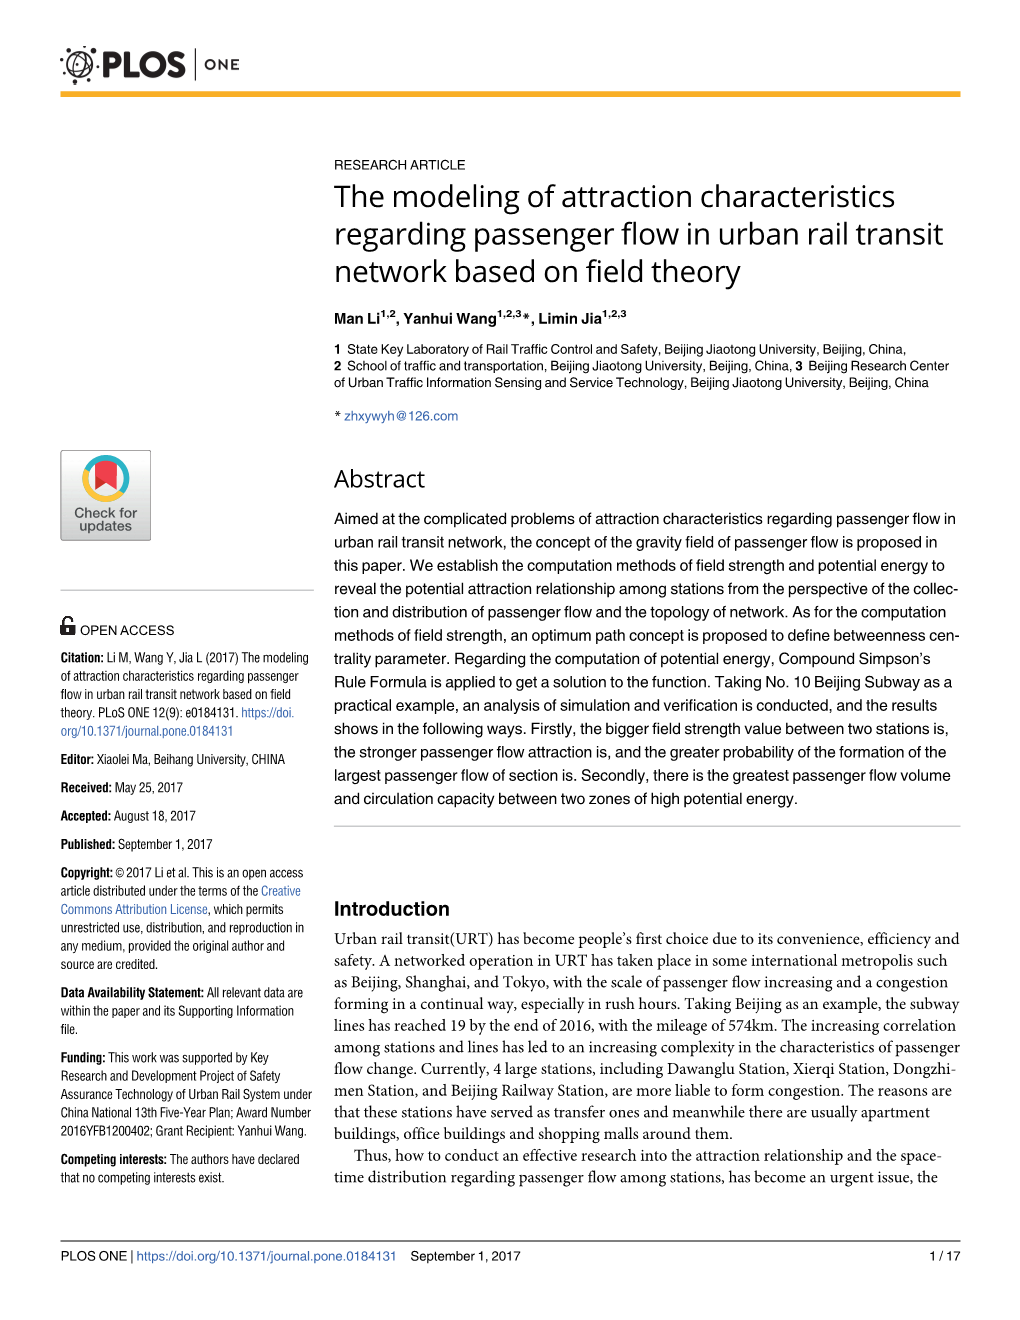 The Modeling of Attraction Characteristics Regarding Passenger Flow in Urban Rail Transit Network Based on Field Theory